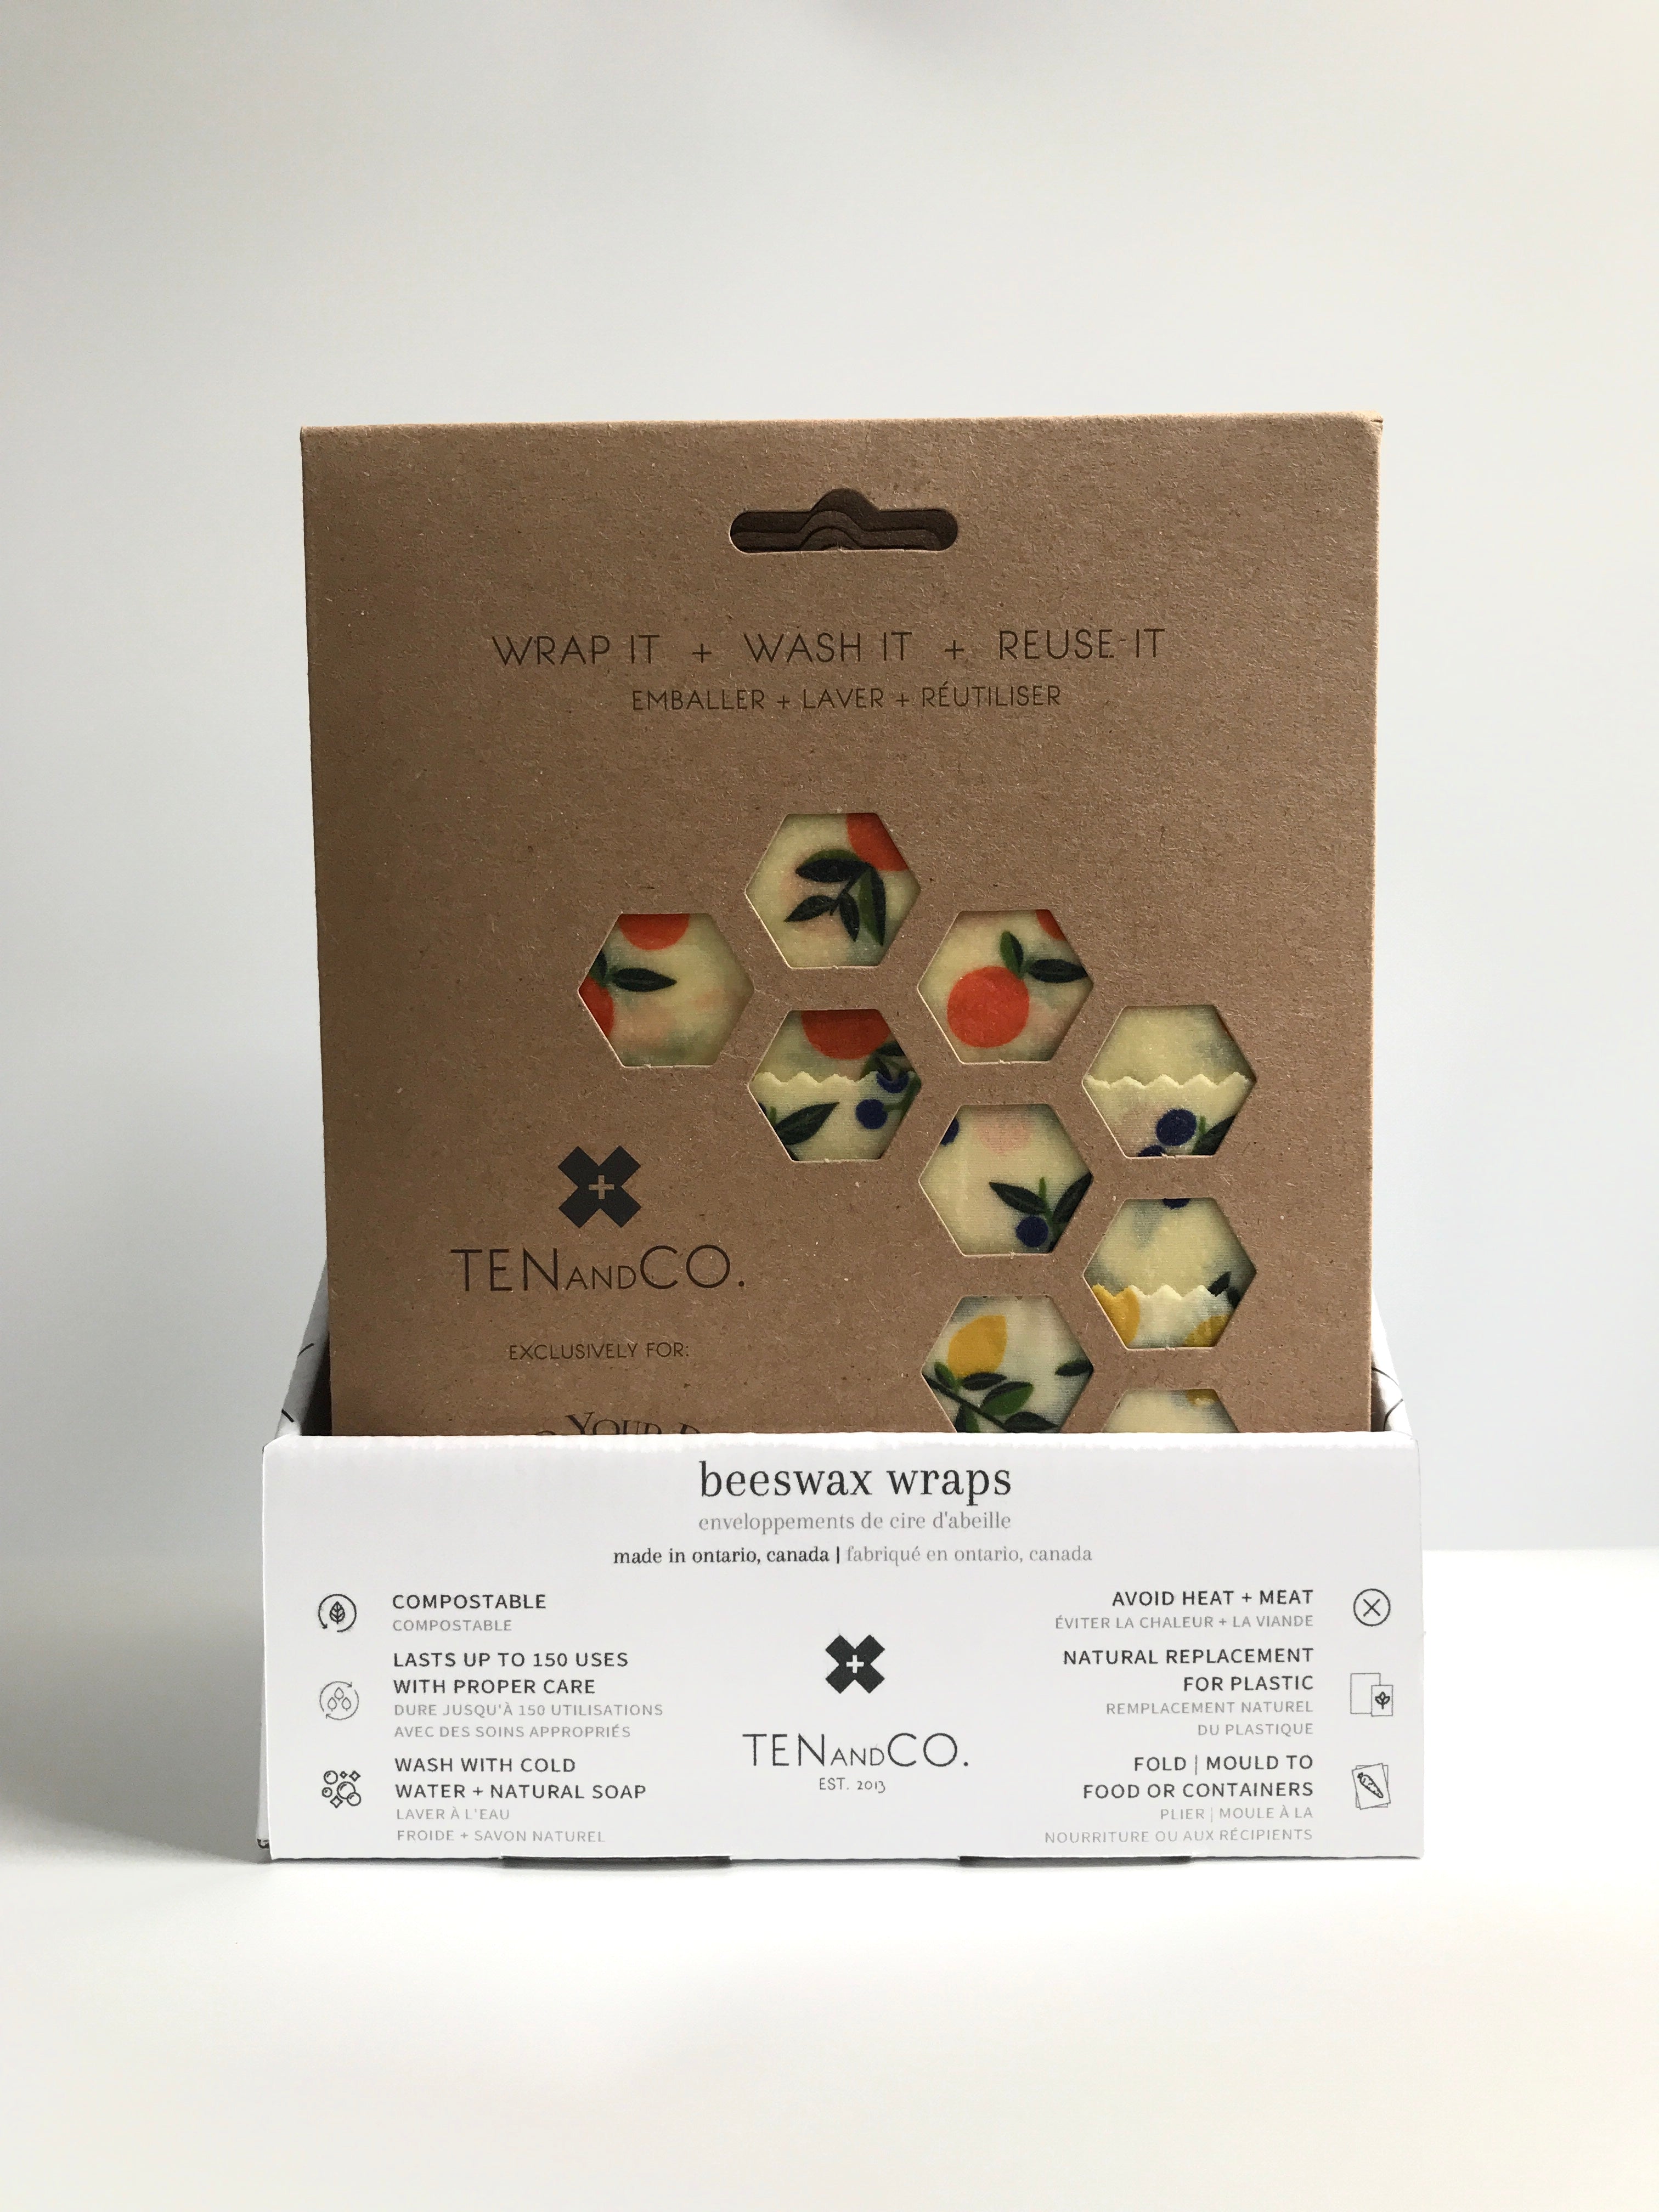 Straight on image of the Cardboard Display Box for Beeswax Wraps. Box is on a white surface and white background. The box is white with black detailing. The front of the box has the Ten and Co logo in the middle and descriptions of Beeswax wraps in black. The box is filled with Beeswax wraps in brown packaging. The front package is Vintage Fruits, which can be seen through a few hexagonal holes in the packaging. 